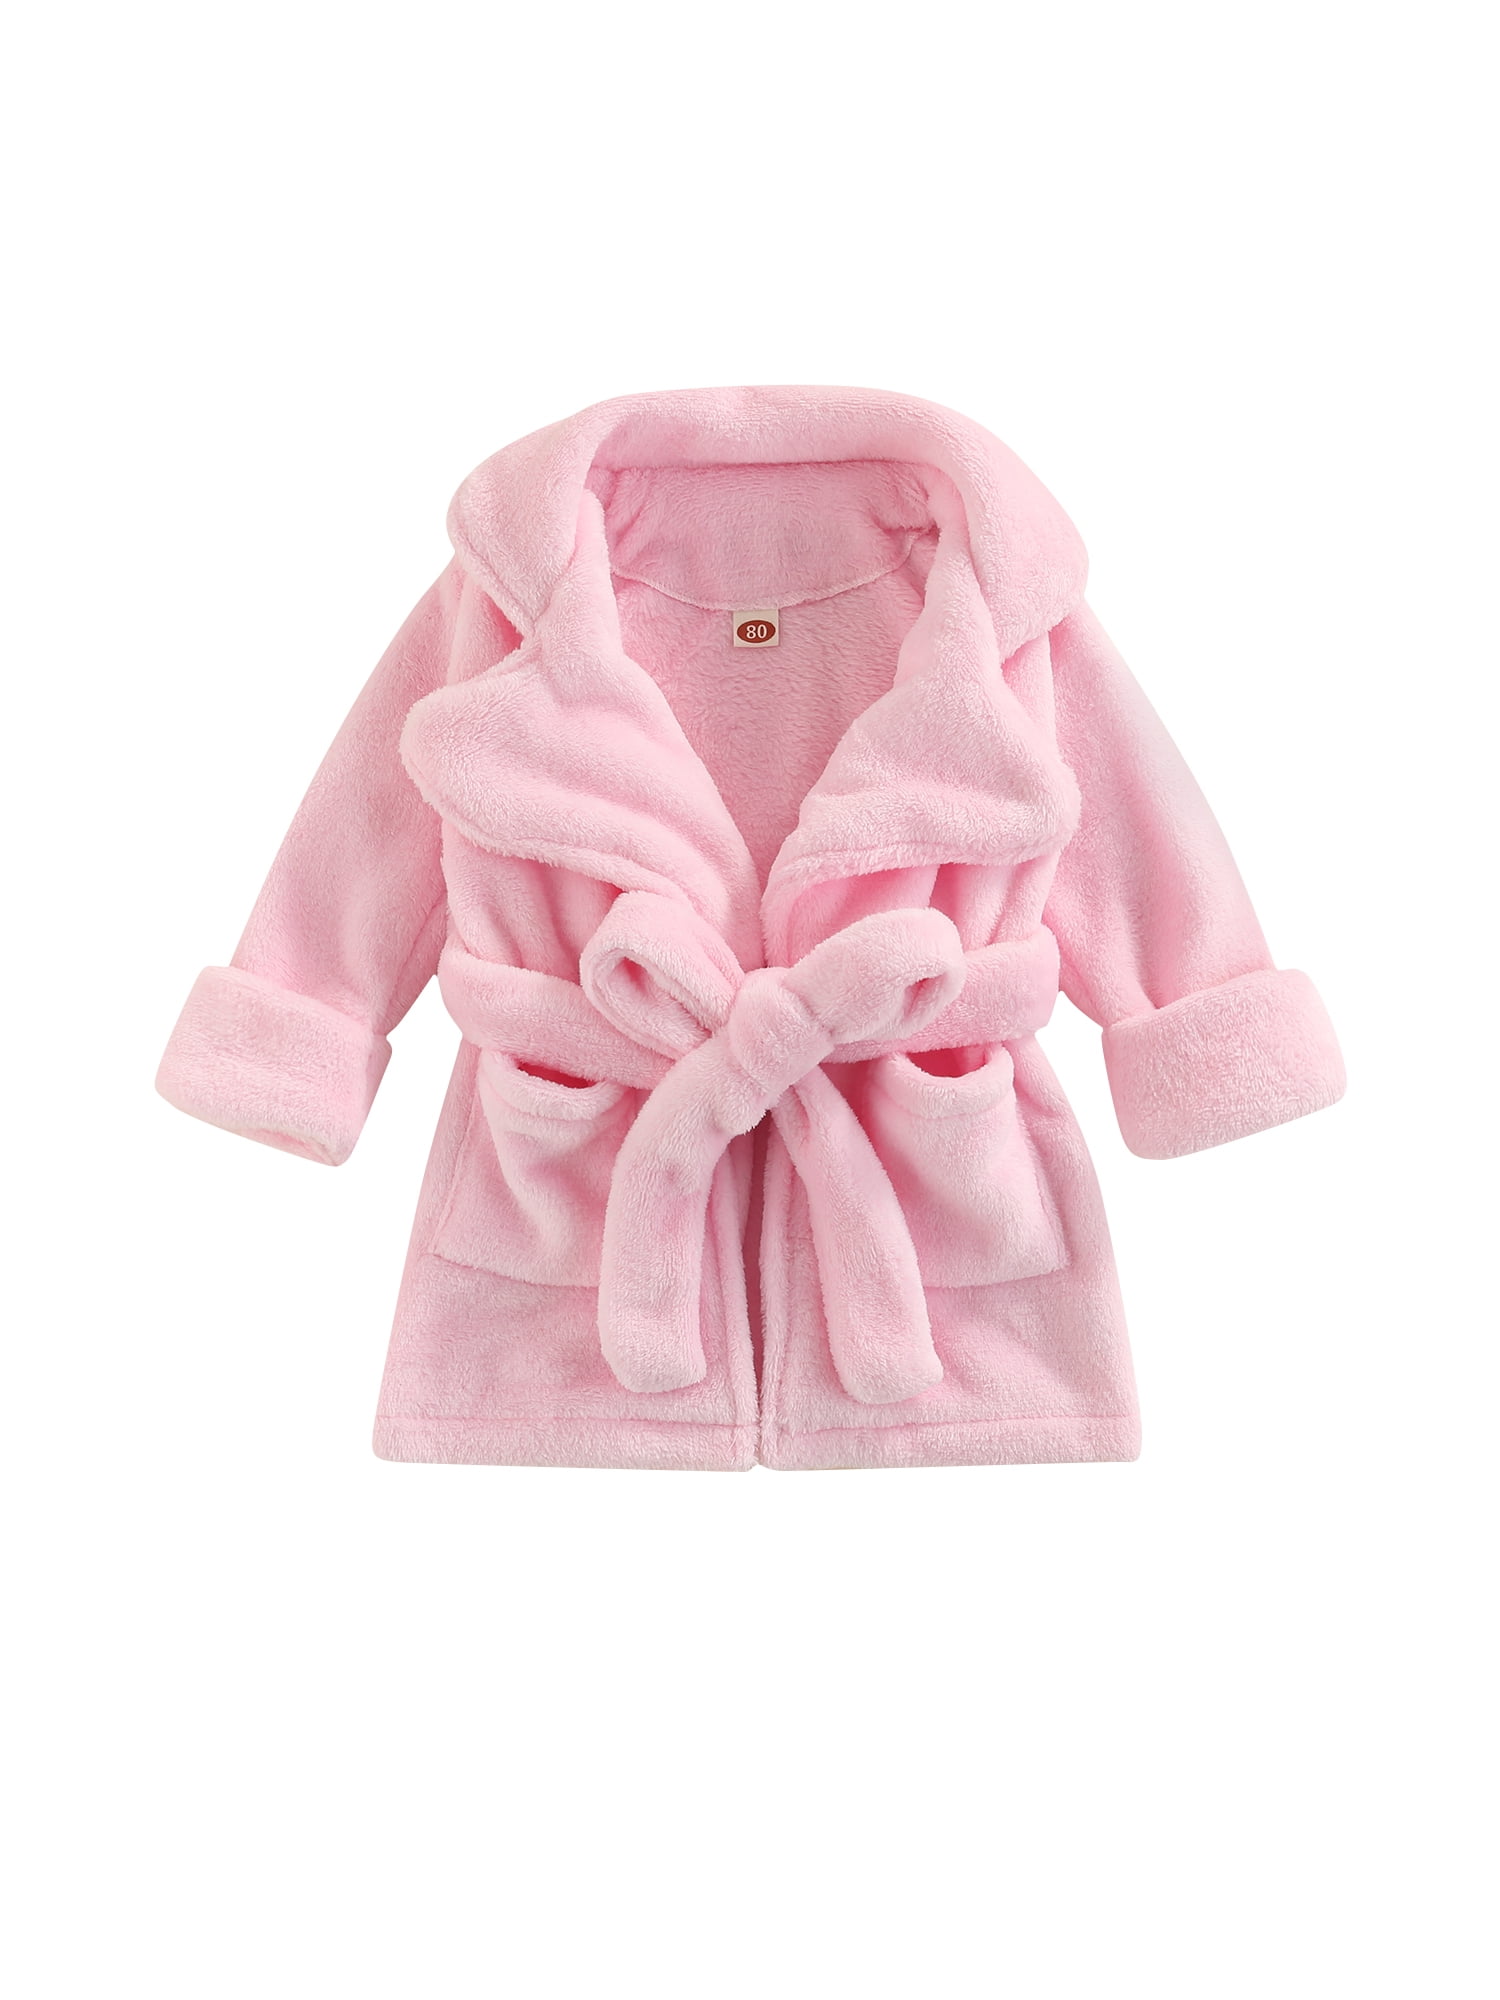 Babys/Toddlers Infant Kid Soft Fleece Hooded Dressing Gown Bath Robe